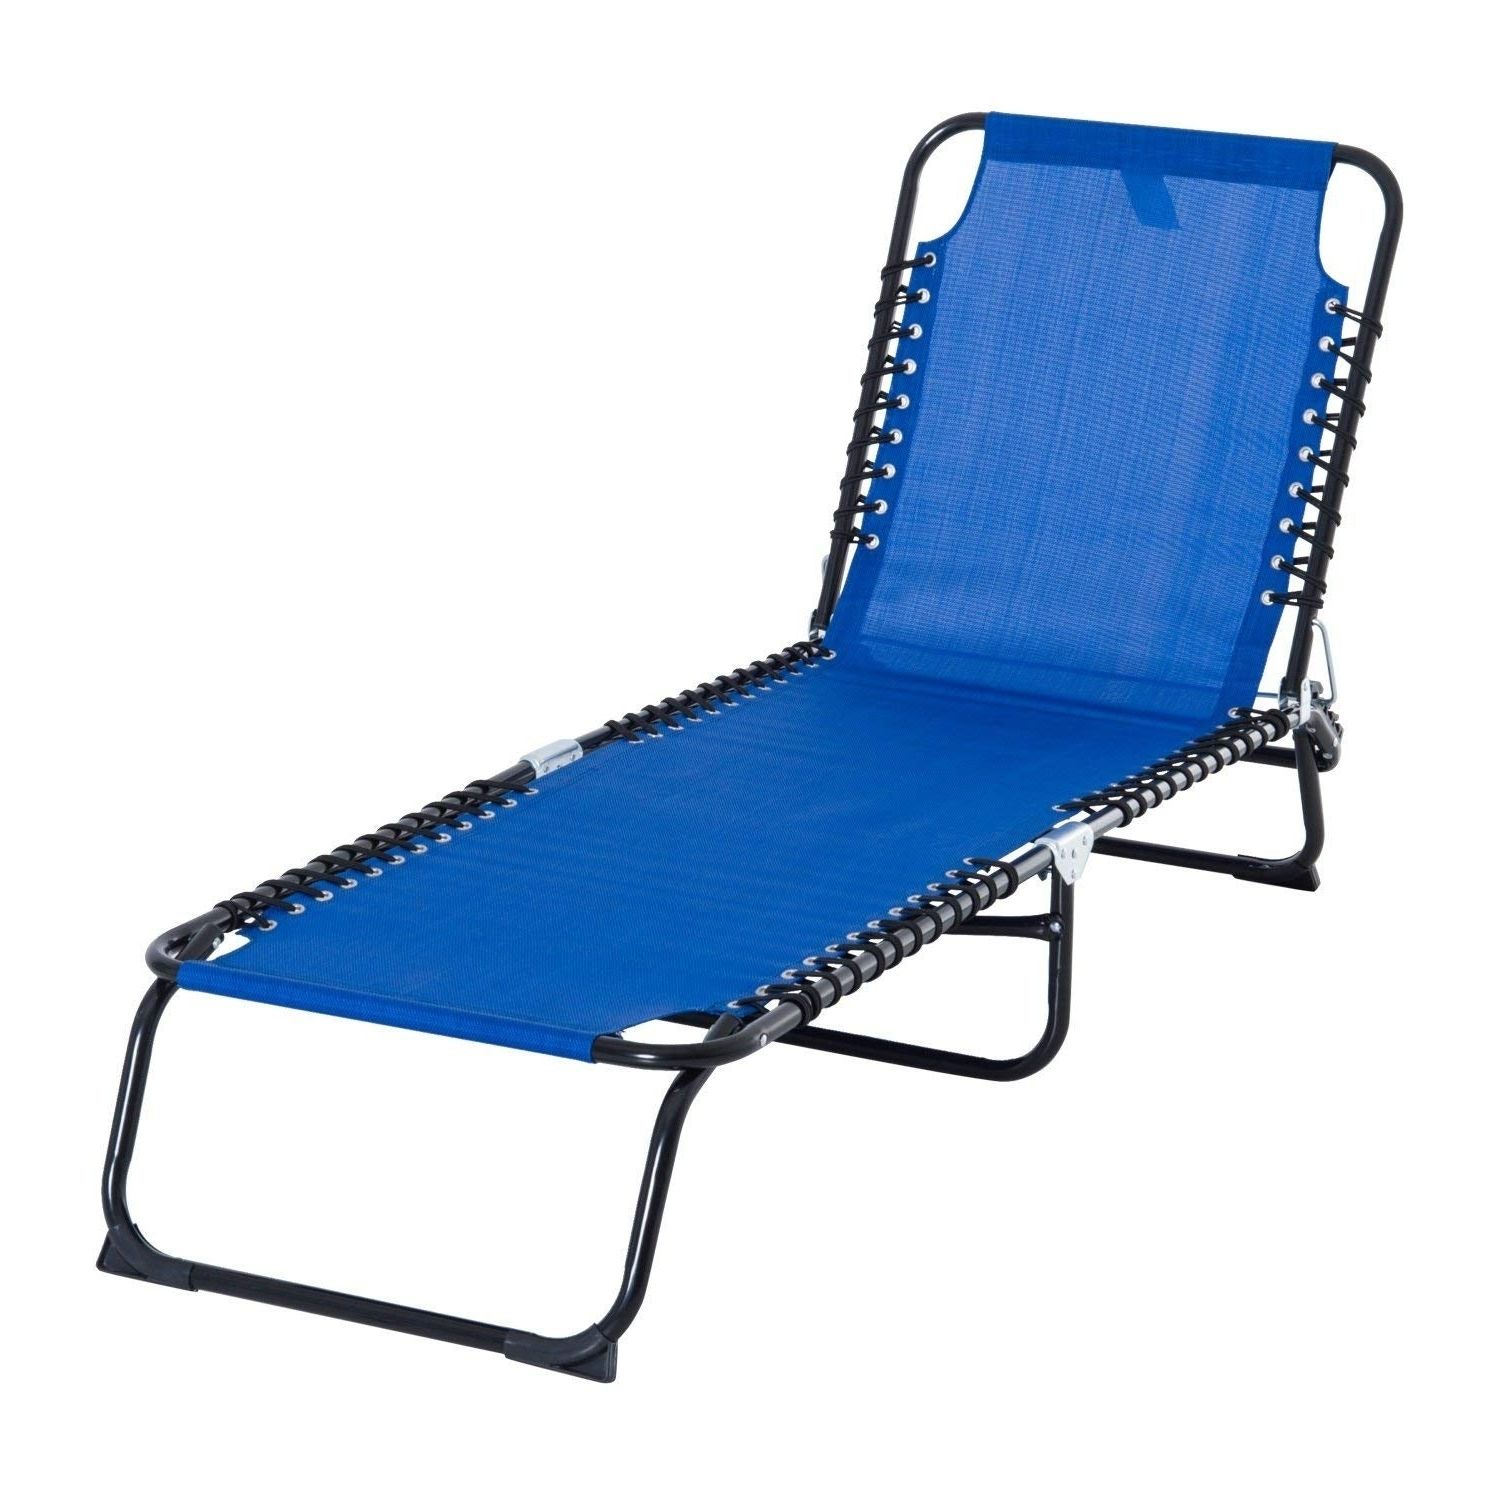 Portable Reclining Beach Chaise Lounge Folding Chairs Intended For Most Recently Released Outsunny 3 Position Portable Reclining Beach Chaise Lounge Folding Chair  Outdoor Patio – Light Blue (View 4 of 25)